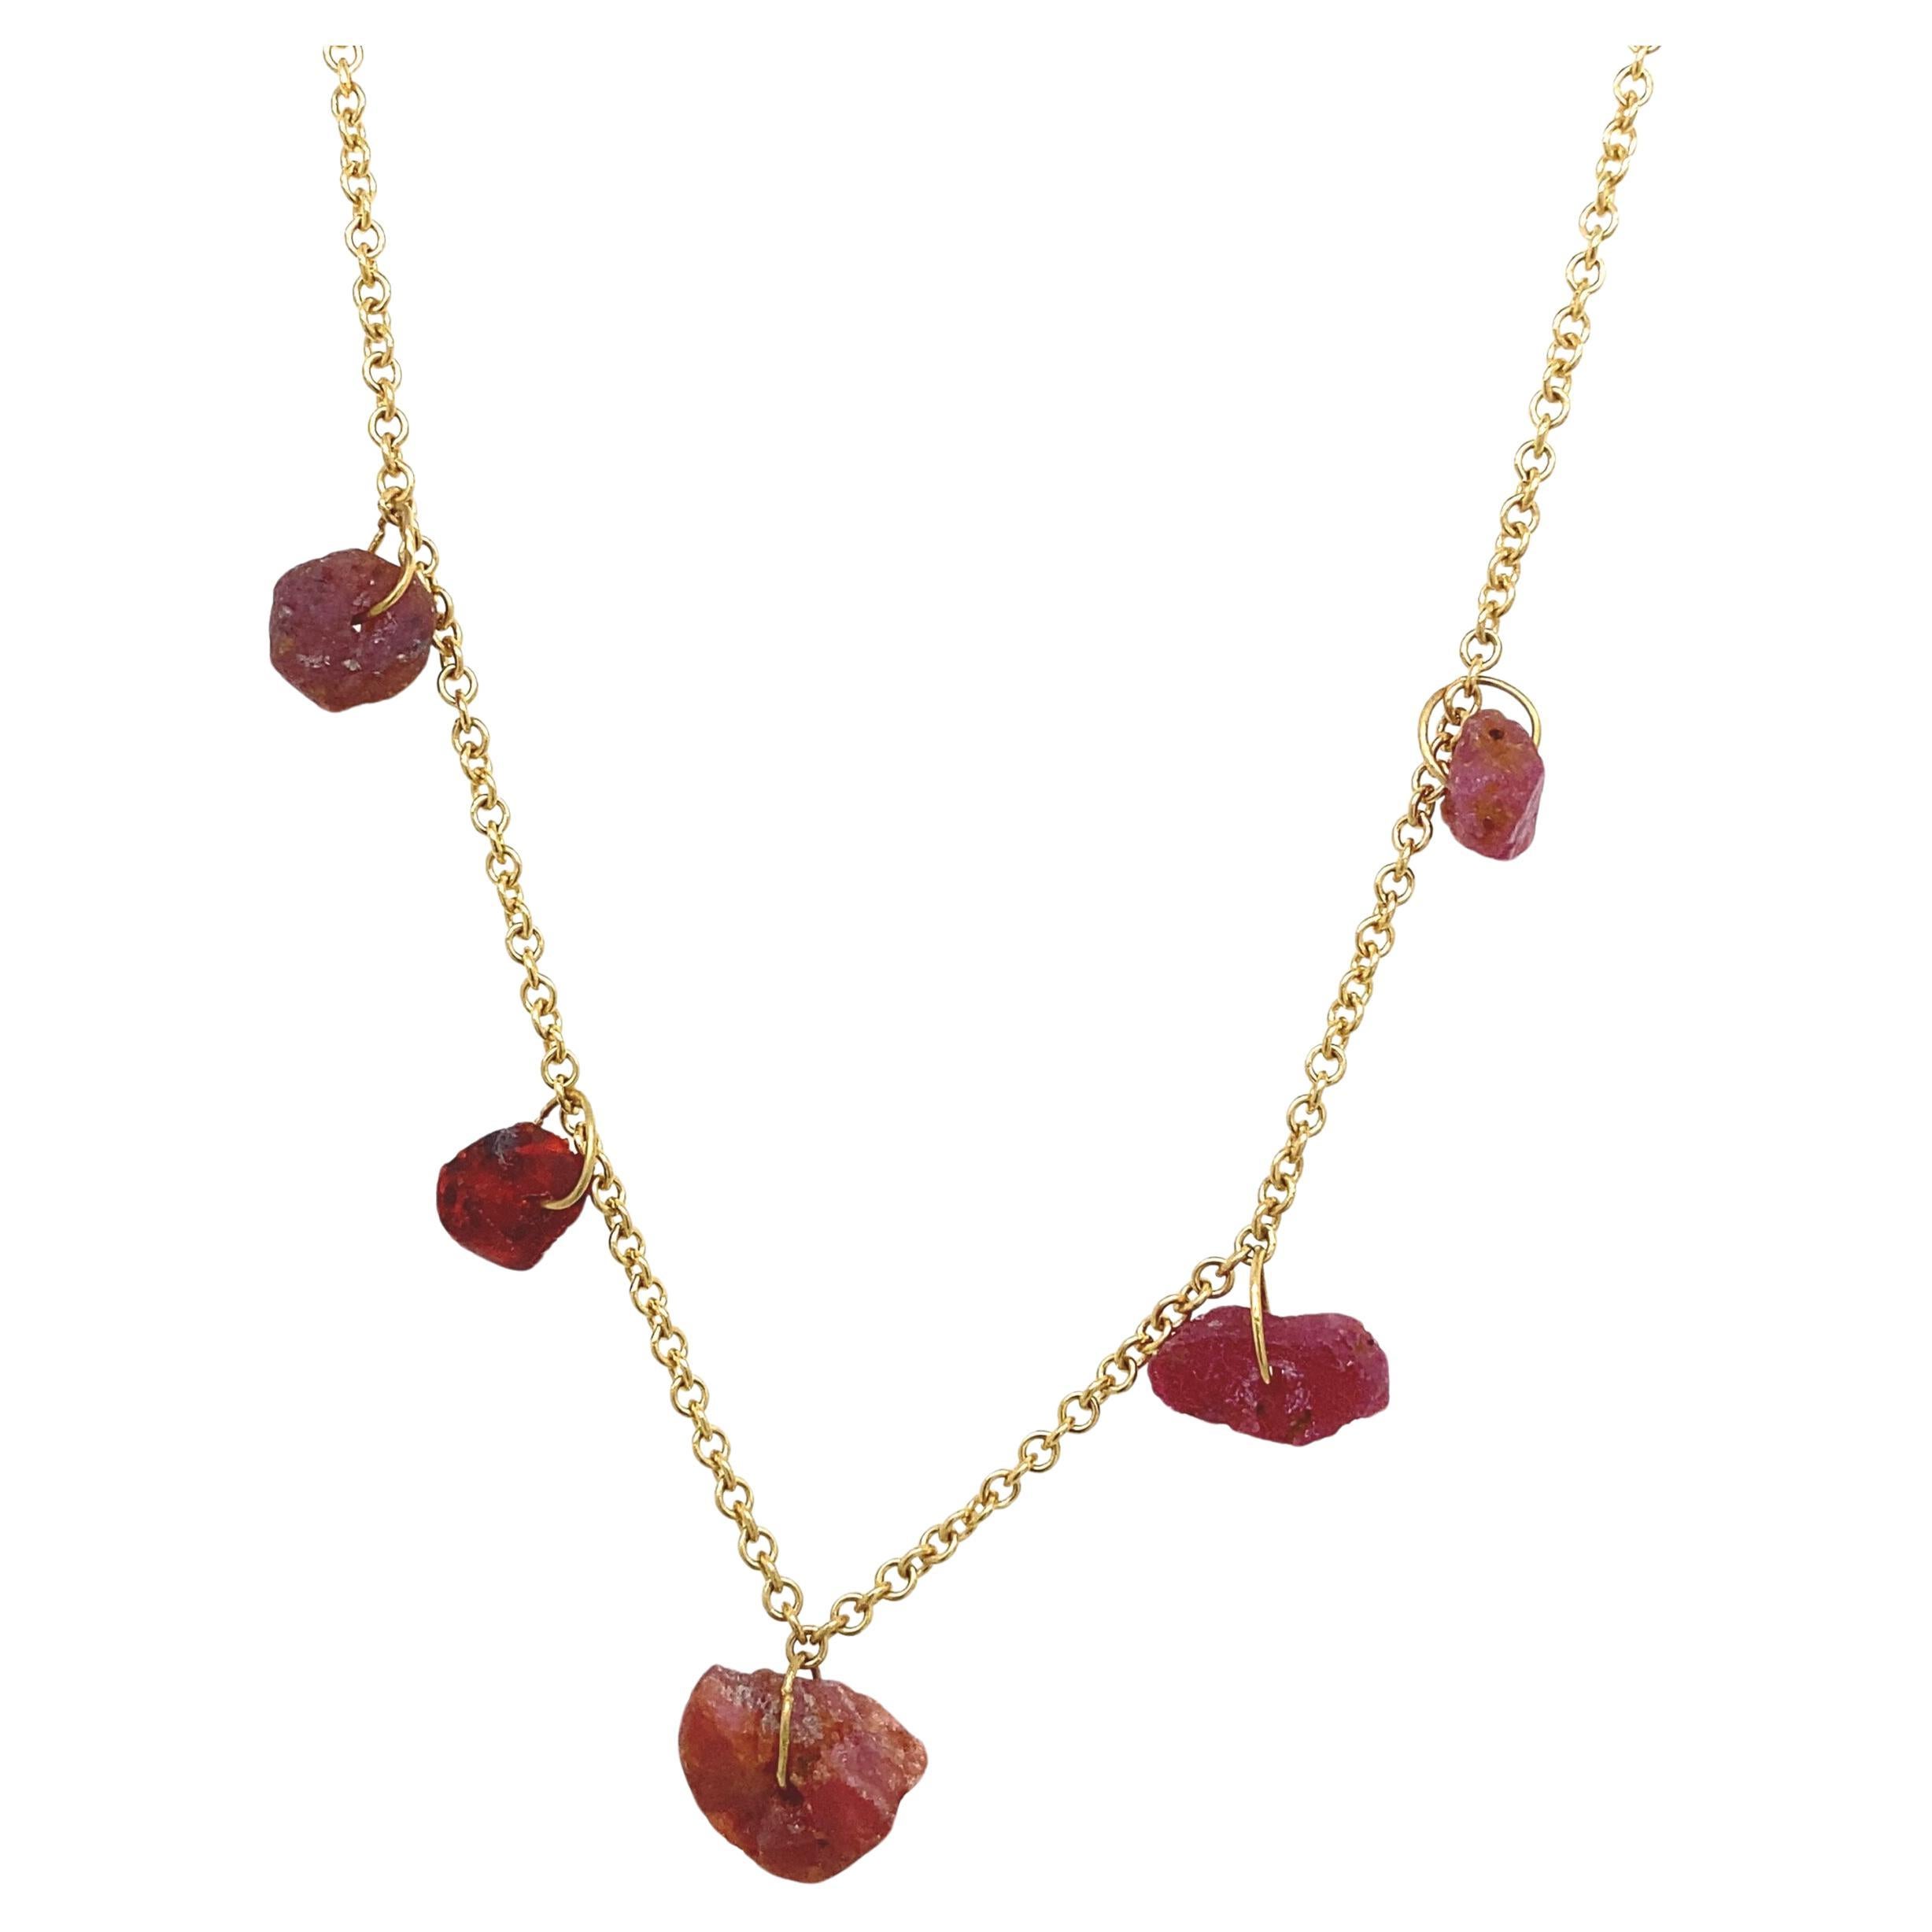 8.40ct Necklace Set with 5 Natural Rubies in 18ct Yellow Gold